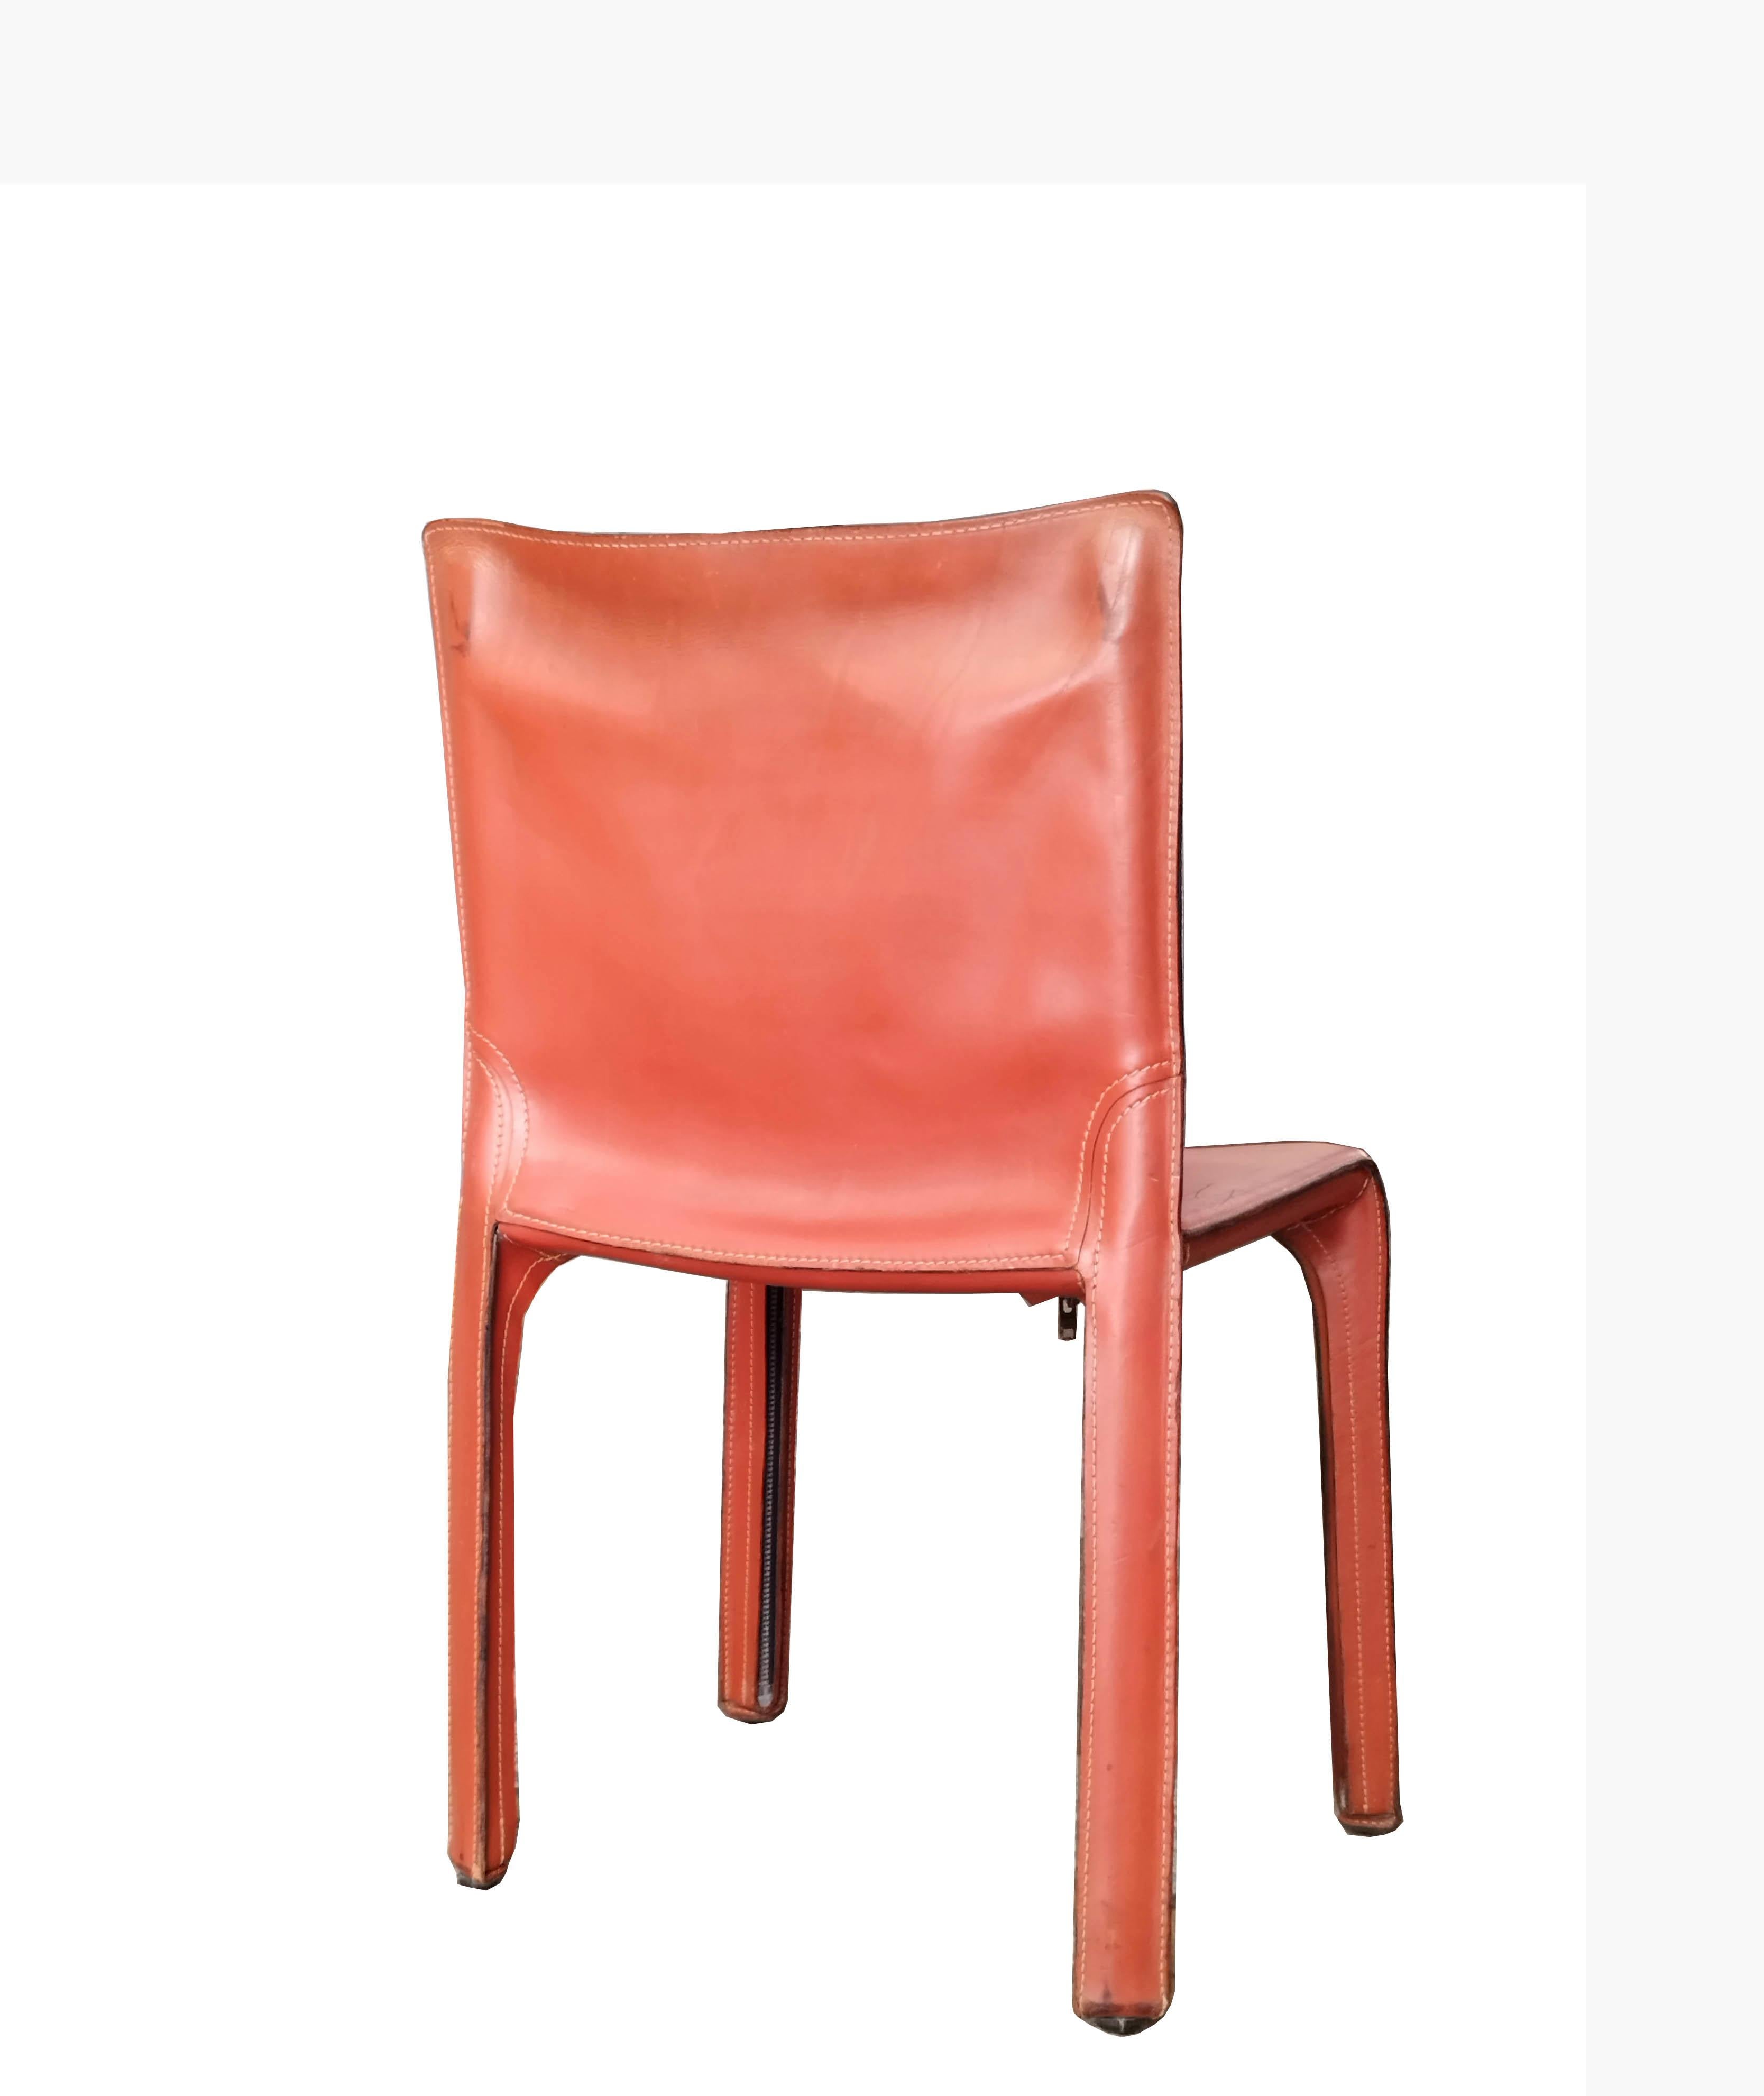 Mid-Century Modern Mario Bellini for Cassina Cab Dining Chair Mod.412, Italy, 1978 For Sale